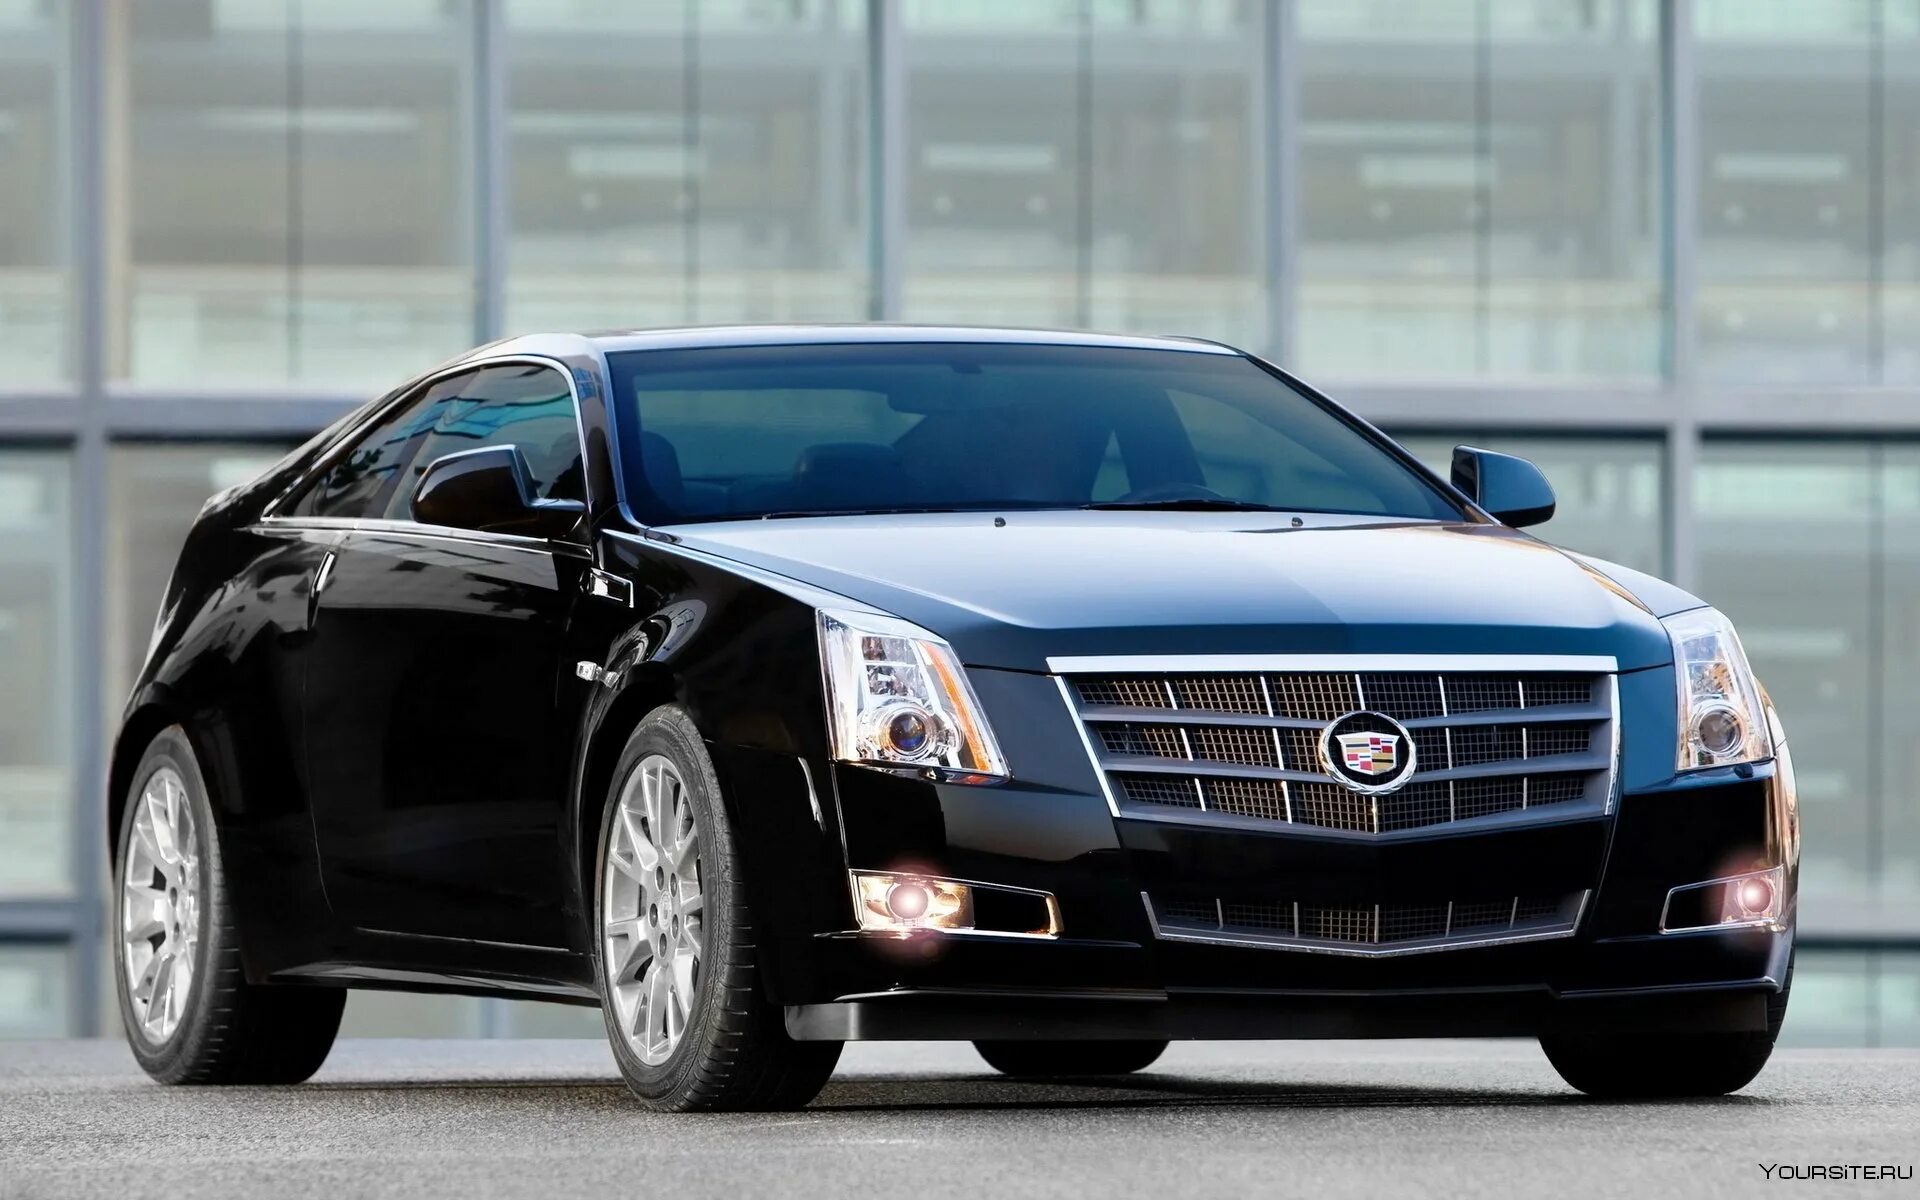 Cadillac CTS 4. Cadillac CTS 2009. Cadillac CTS Coupe 2014. Cadillac CTS Coupe 3.6.